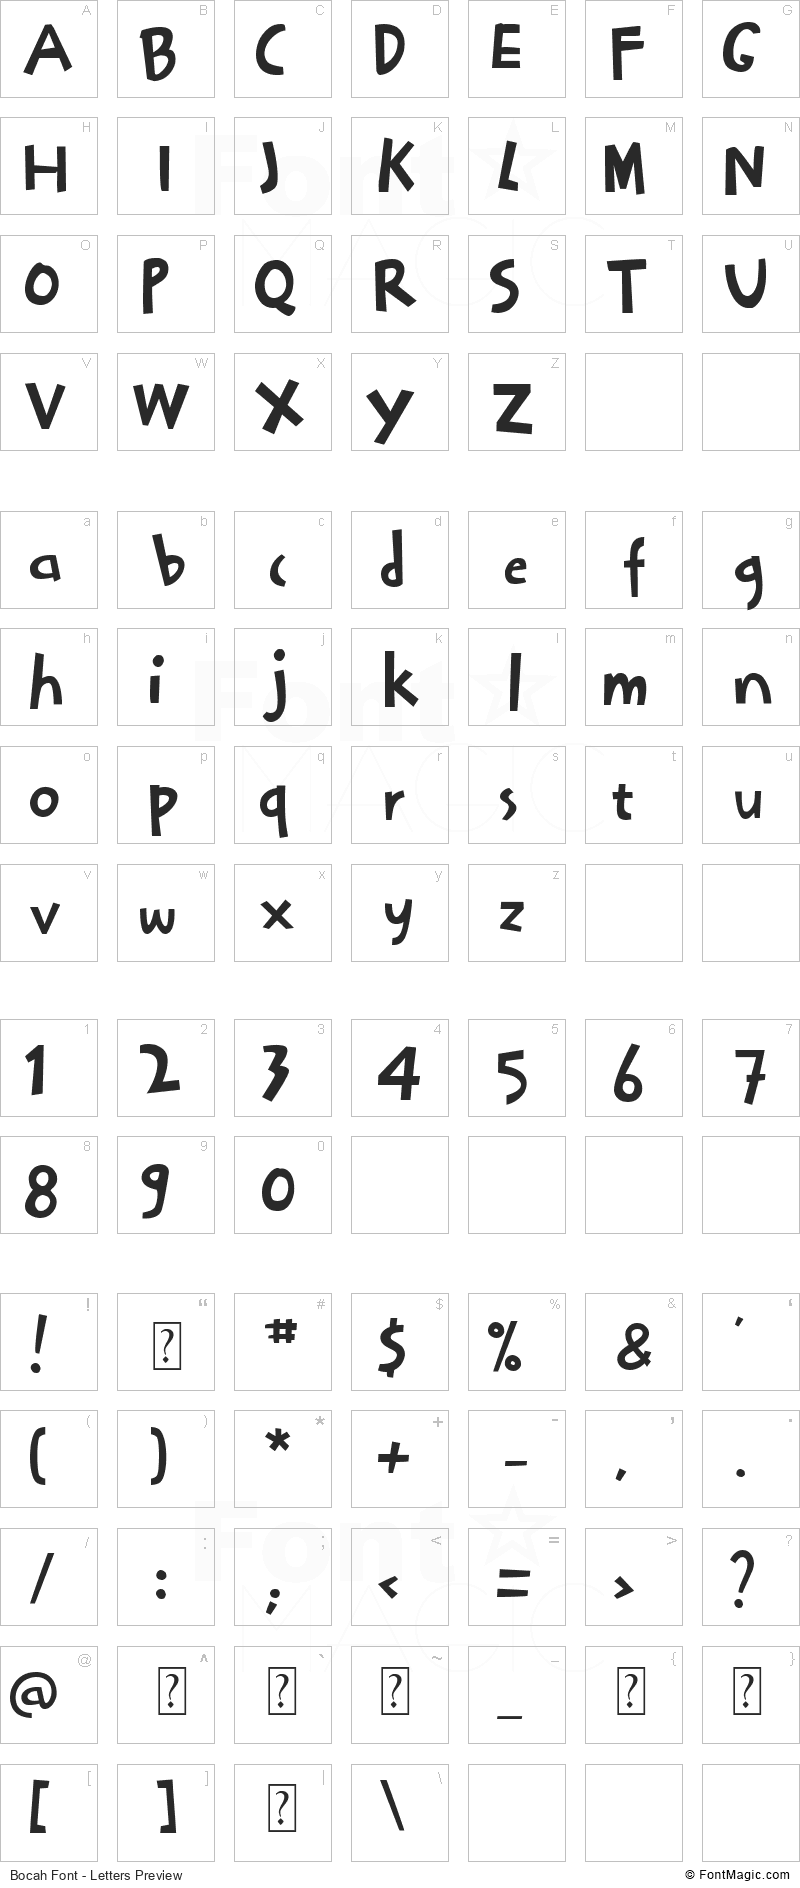 Bocah Font - All Latters Preview Chart